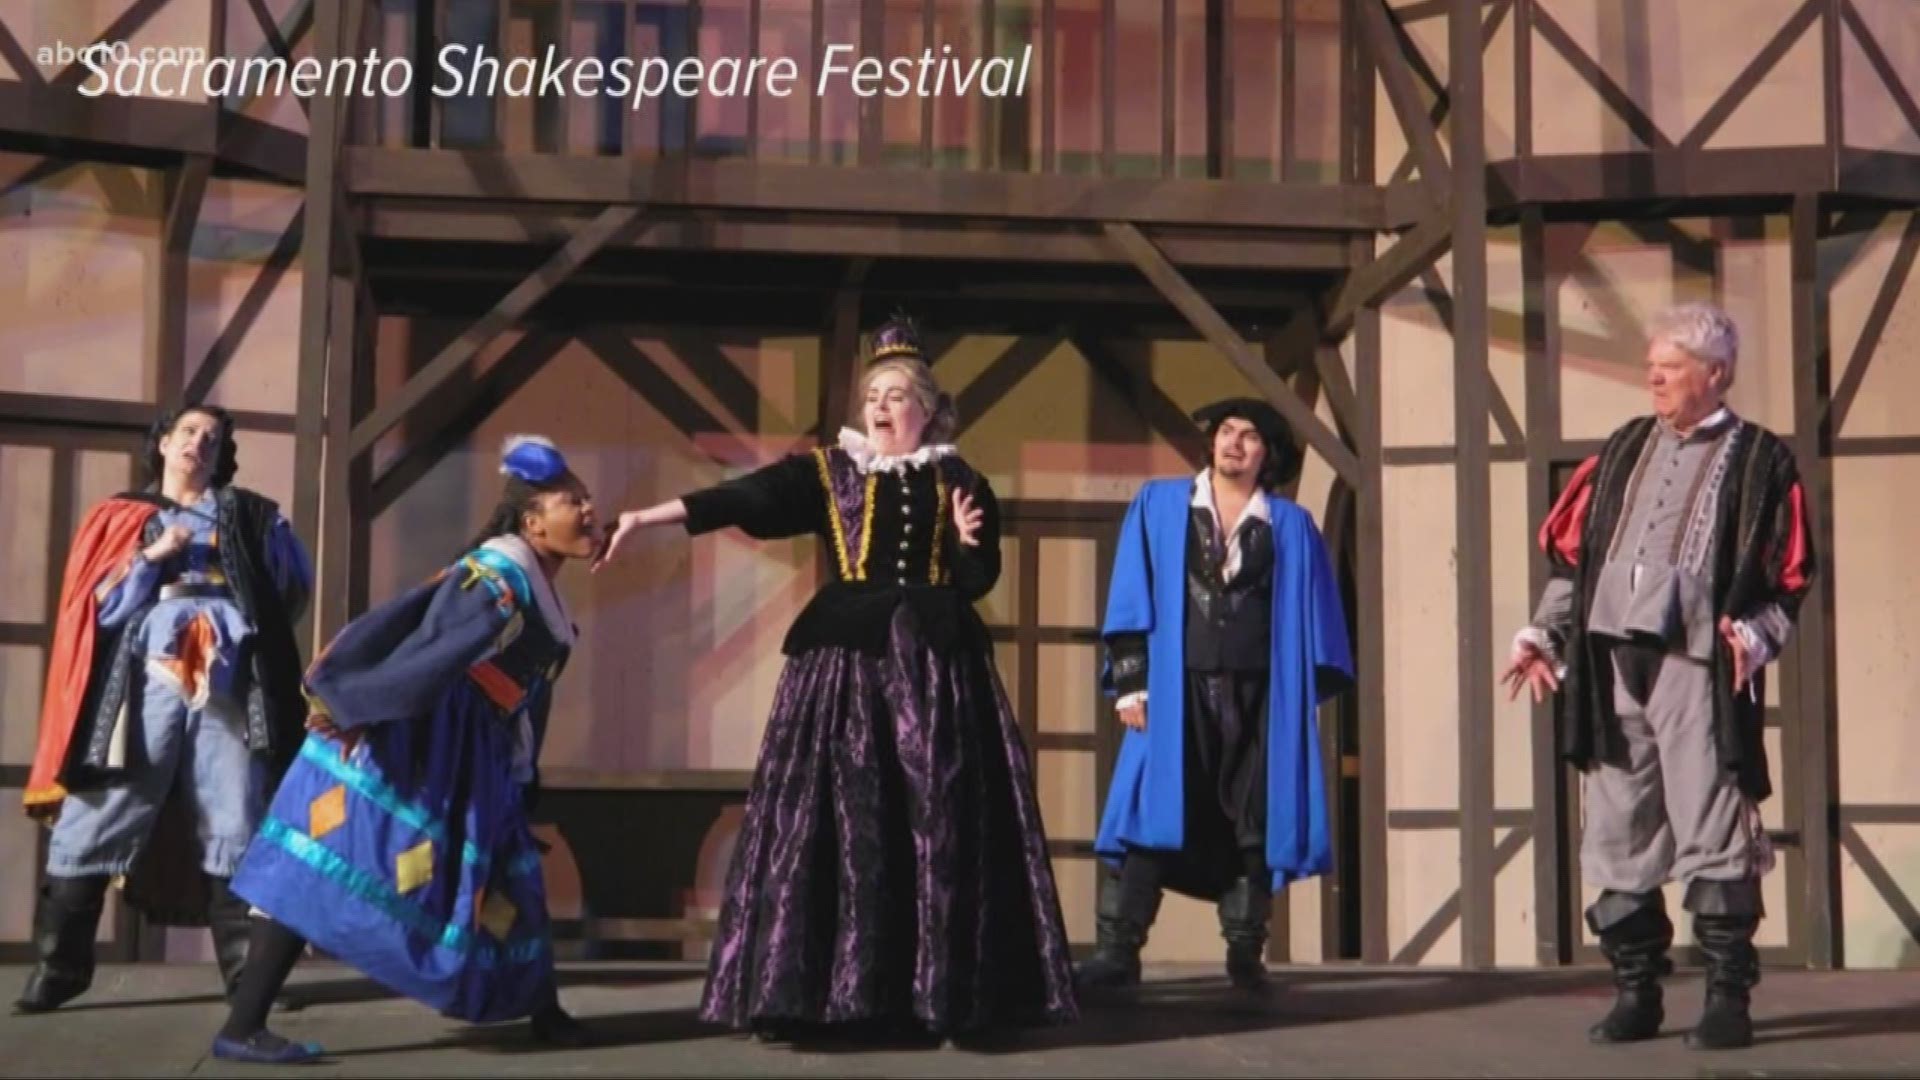 After 32 years in William Land Park, the Sacramento Shakespeare Festival opens at Sacramento City College.